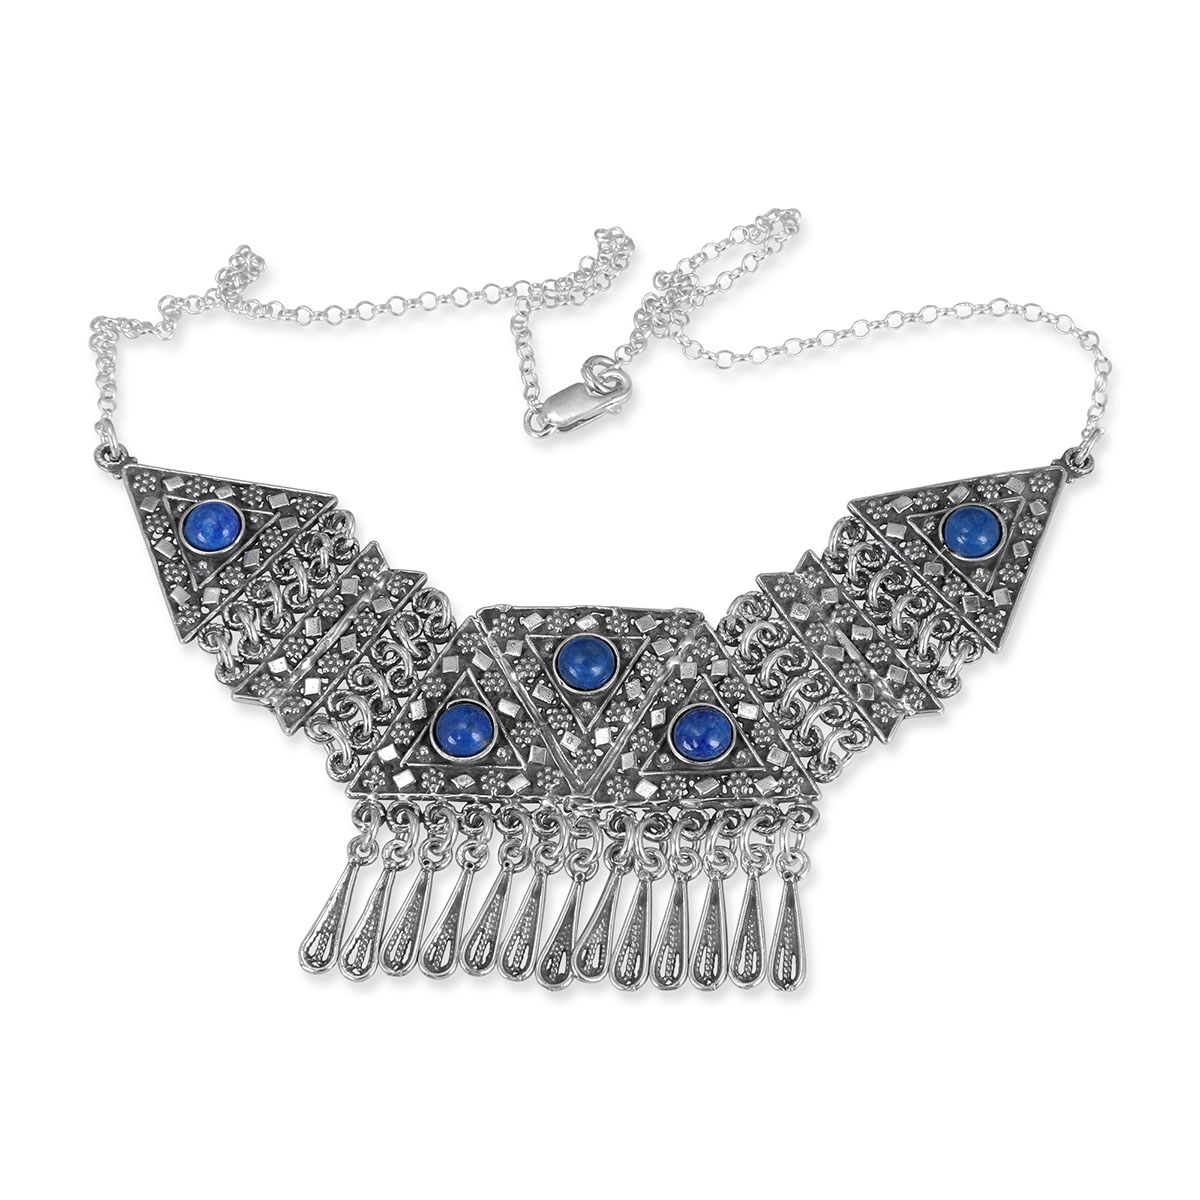 Traditional Yemenite Art Handcrafted Sterling Silver Necklace With Blue Lapis Stones - 1